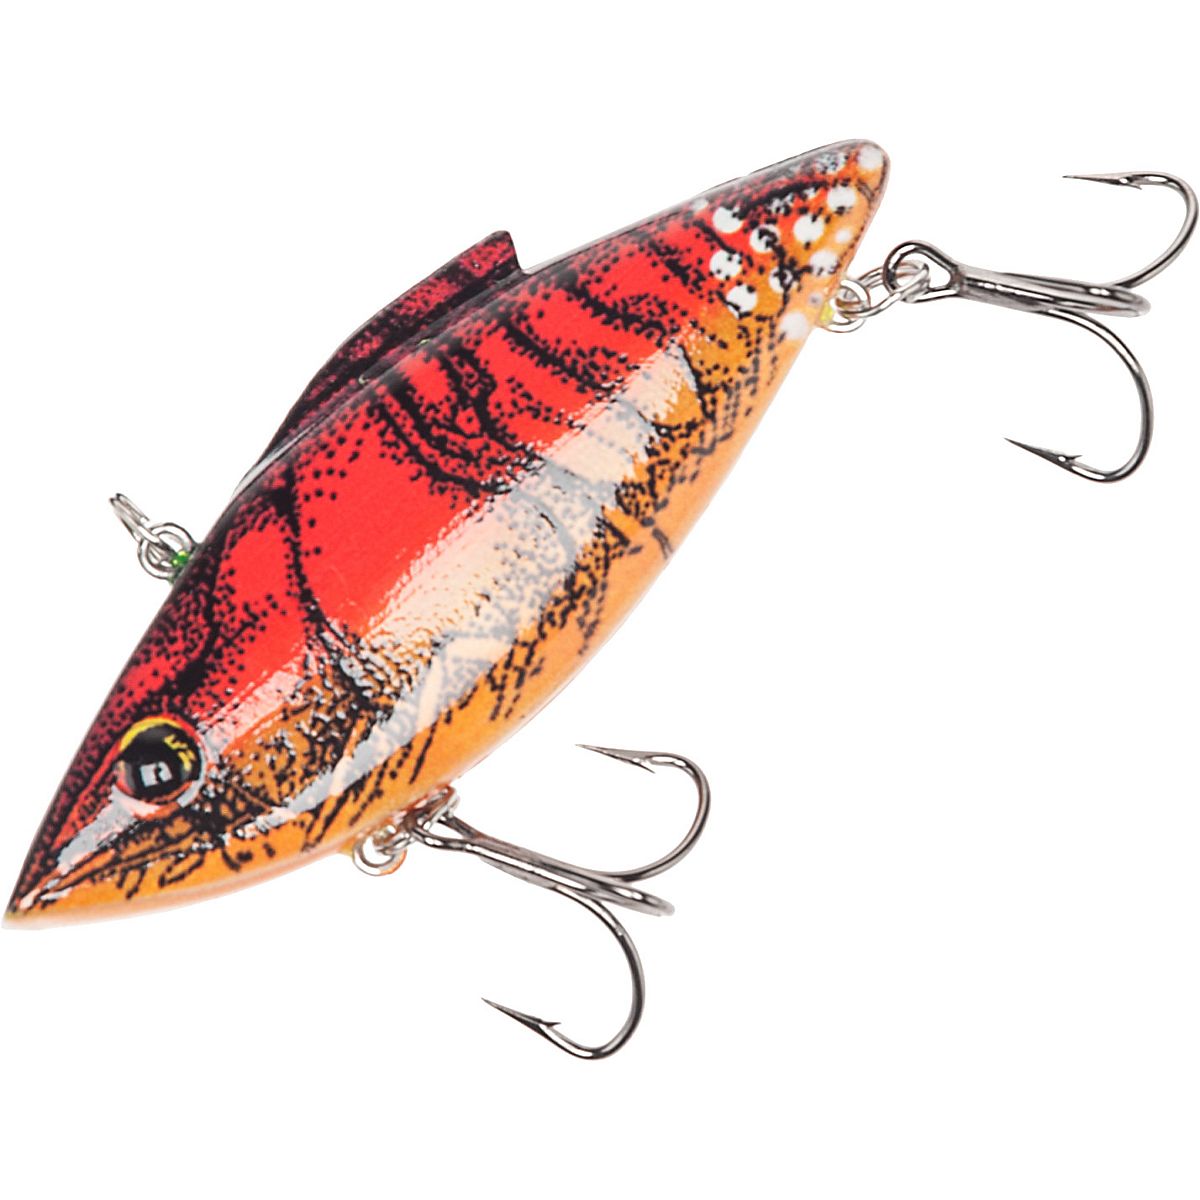  Bill Lewis Lures Lifelike Vibrations Rat-L-Trap 1/2 OZ Lipless  Crankbait Fishing Wobble Sinking Lure for Black Bass, Trout, Walleye, Pike,  Salmon, Sky SHAD : Sports & Outdoors